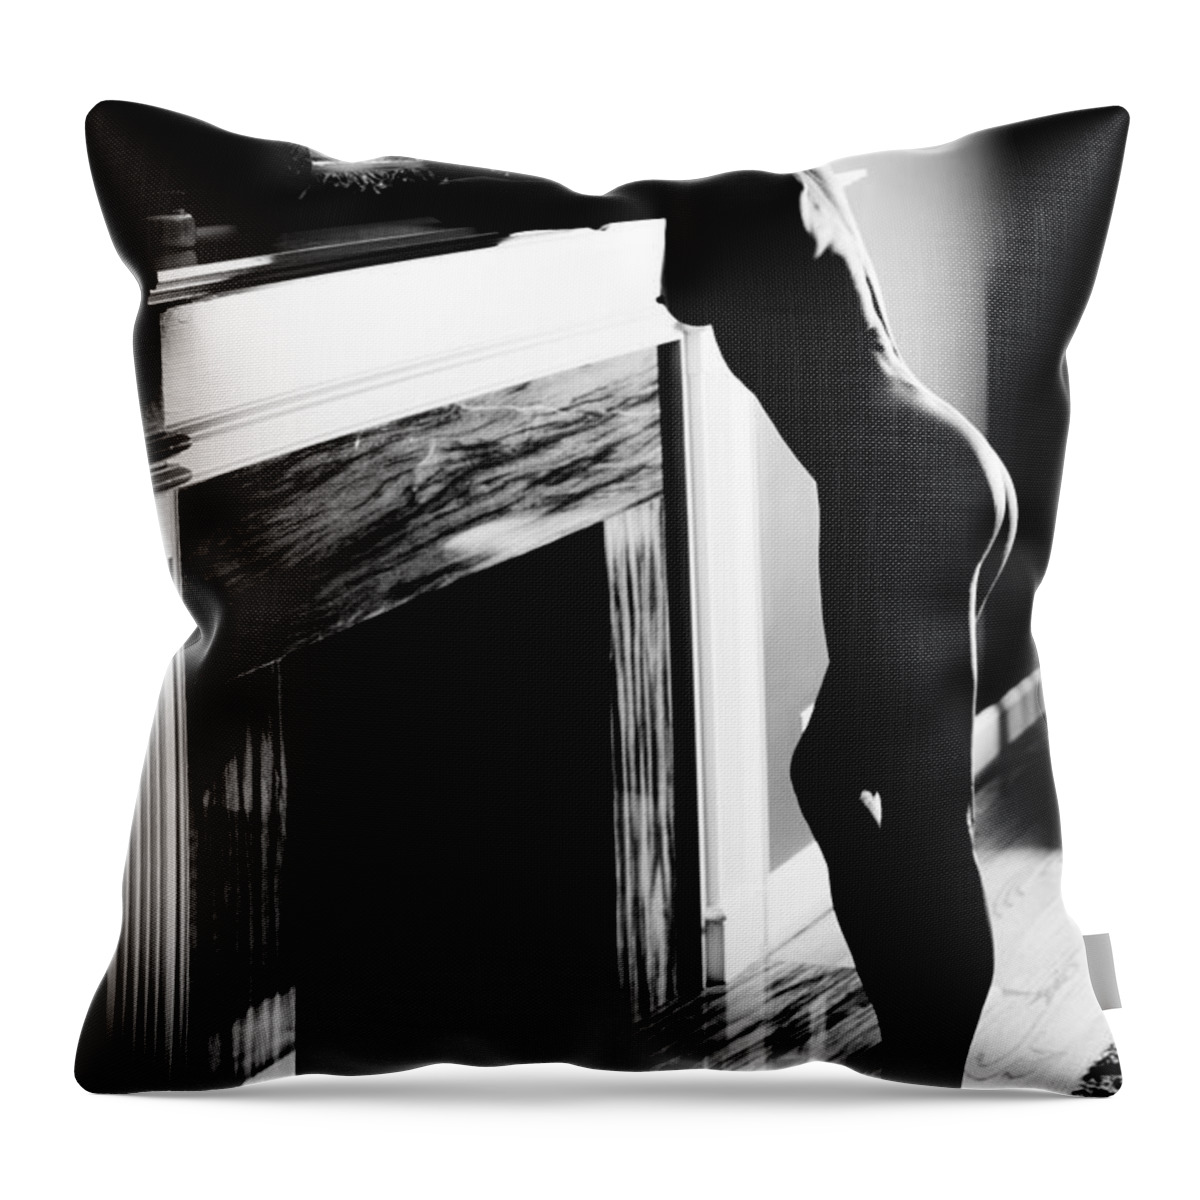 Abdomen Throw Pillow featuring the photograph High Contrast Nude #1 by Jt PhotoDesign